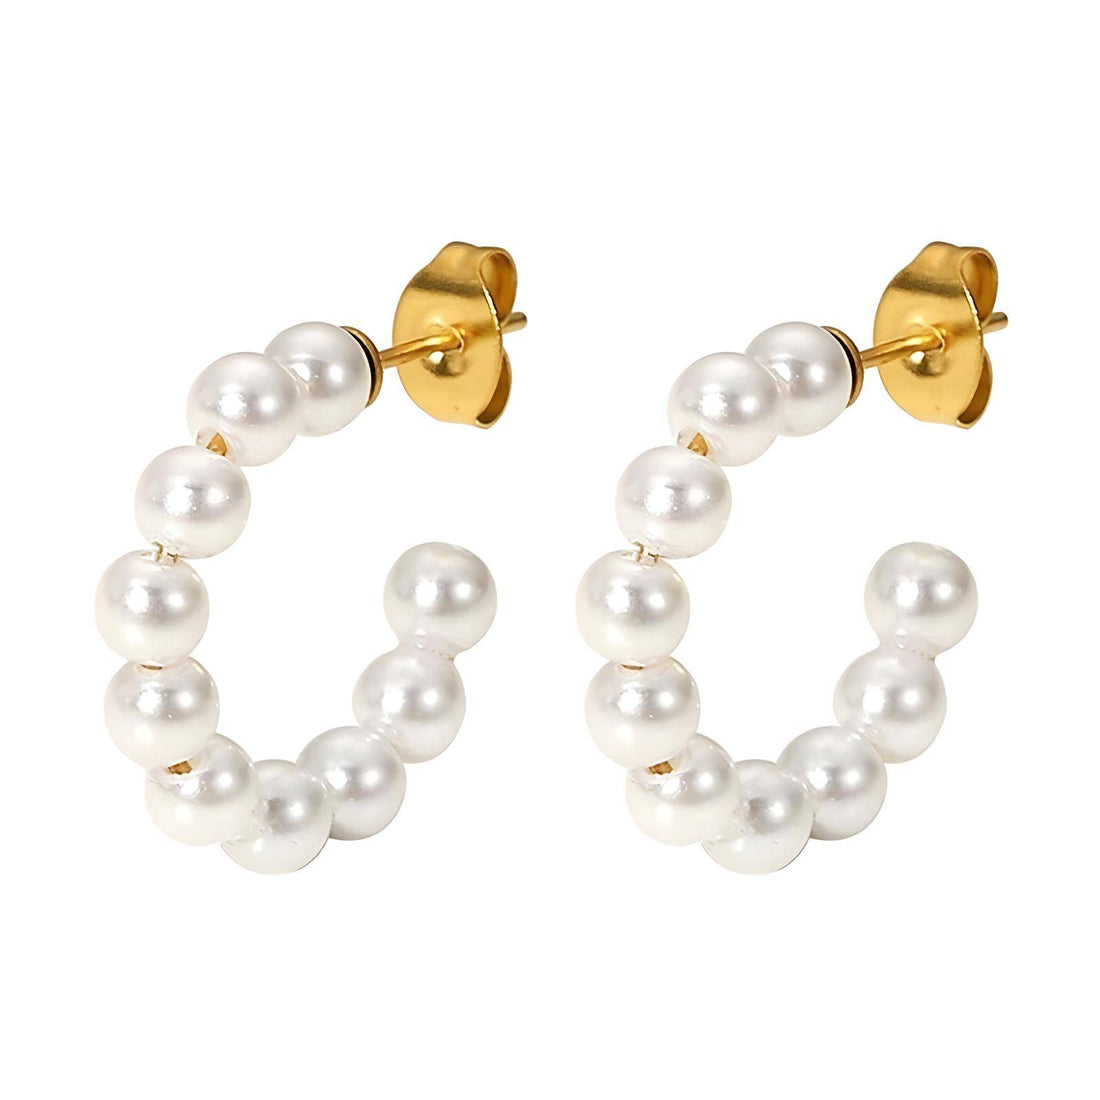 18K GOLD PLATED STAINLESS STEEL PEARL IMITATION EARRINGS